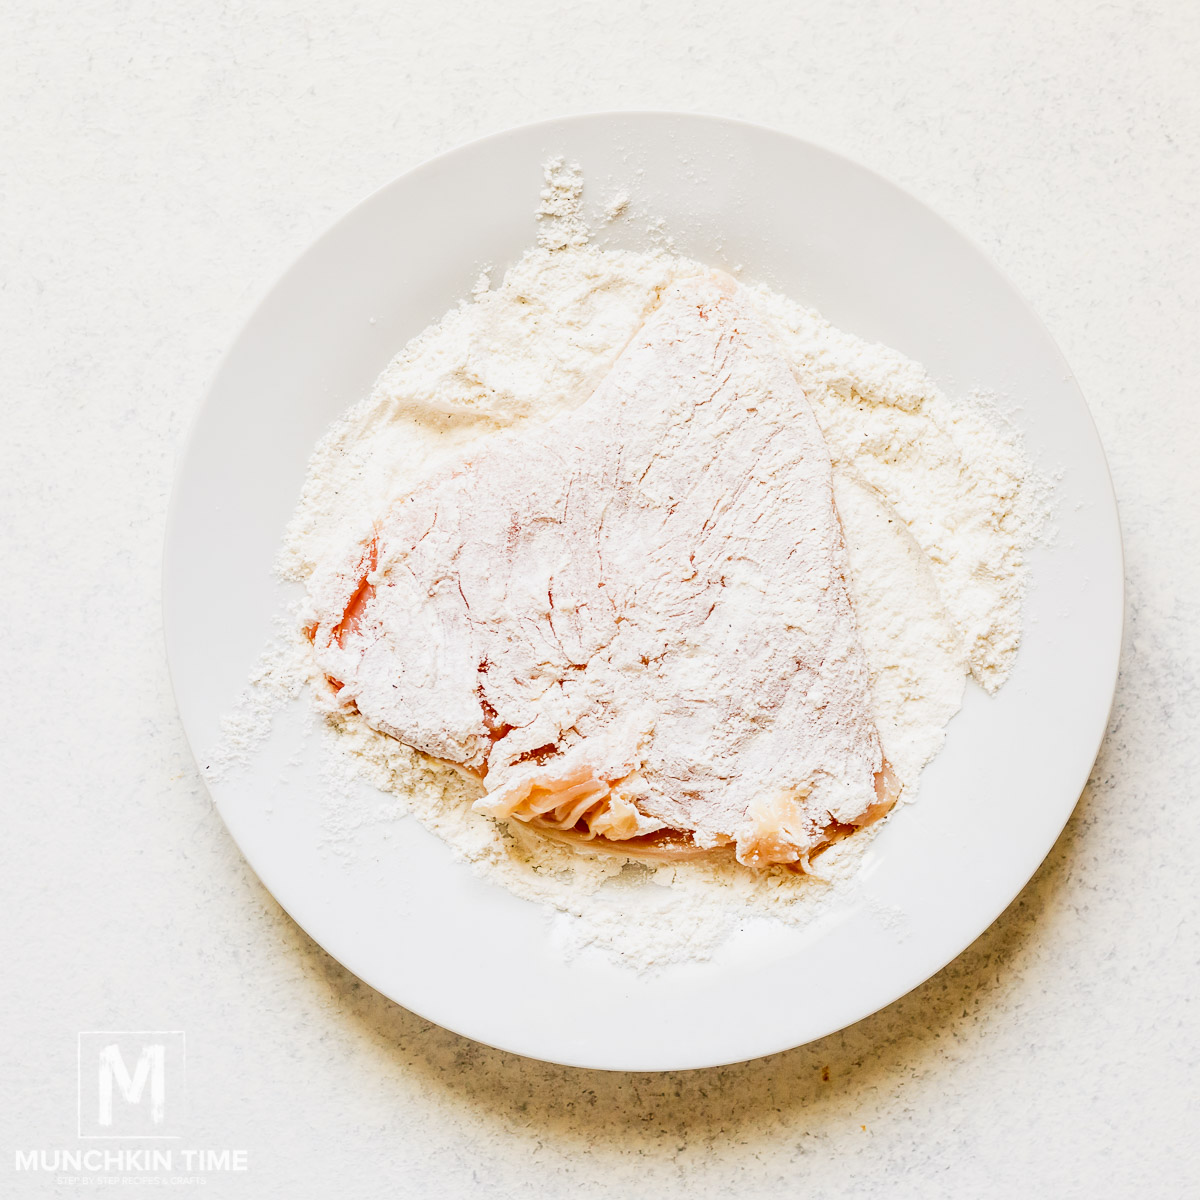 Pounded chicken breast dusted in flour.